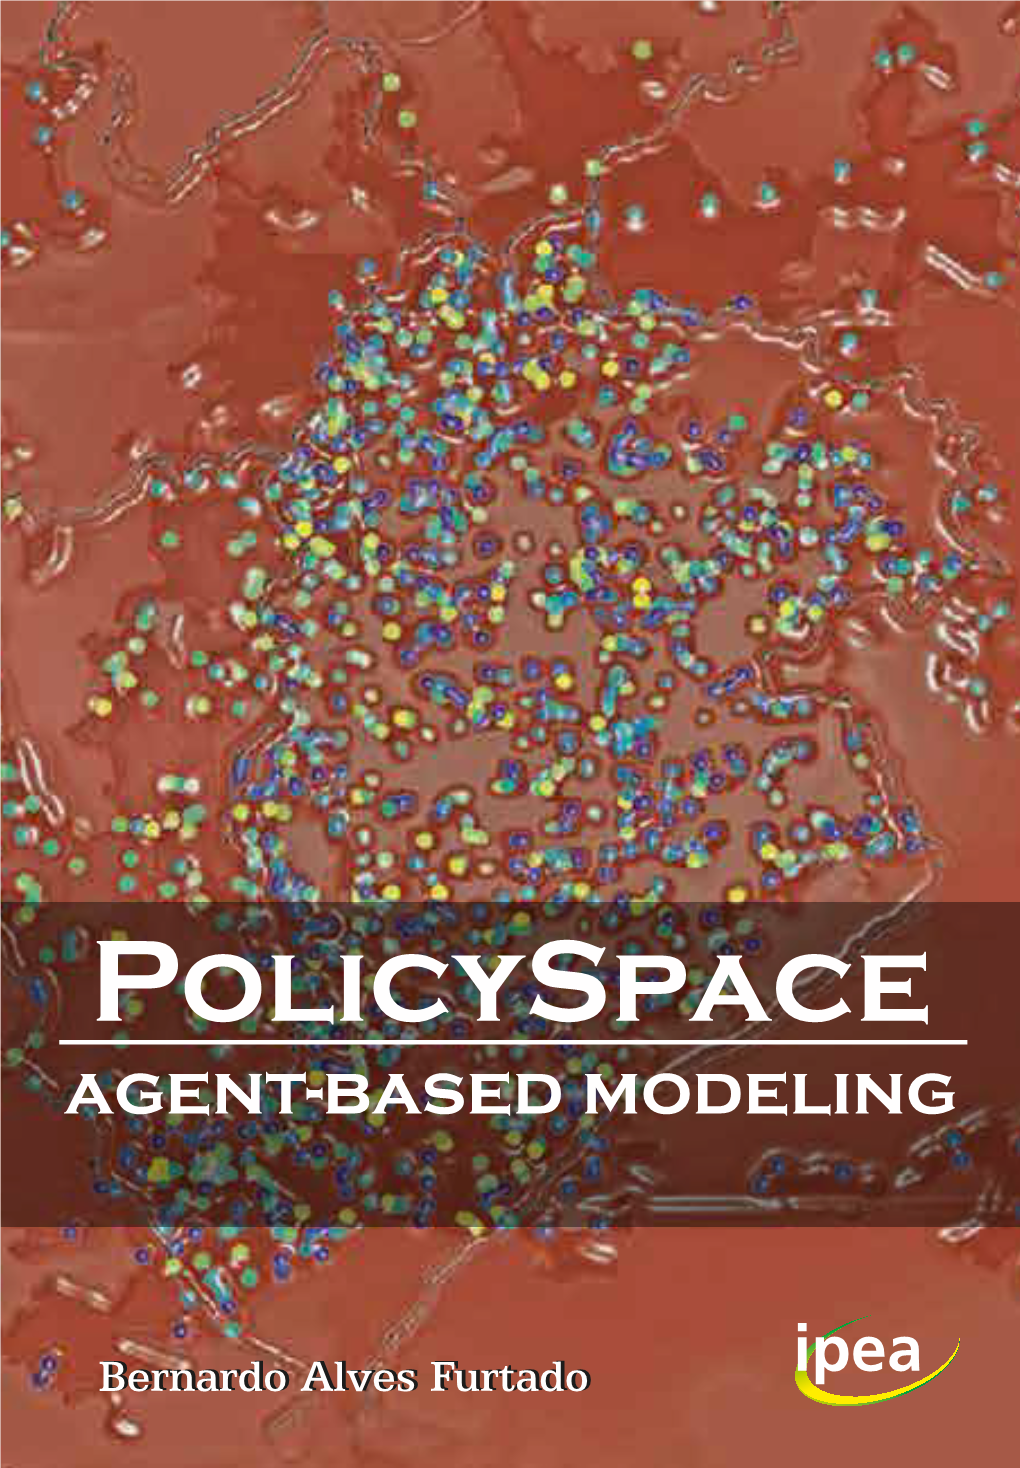 Policyspace Is an Empirical Platform, Adjusted for the Case of 333 Brazilian Municipalities Located in the 46 Population Concentration Areas